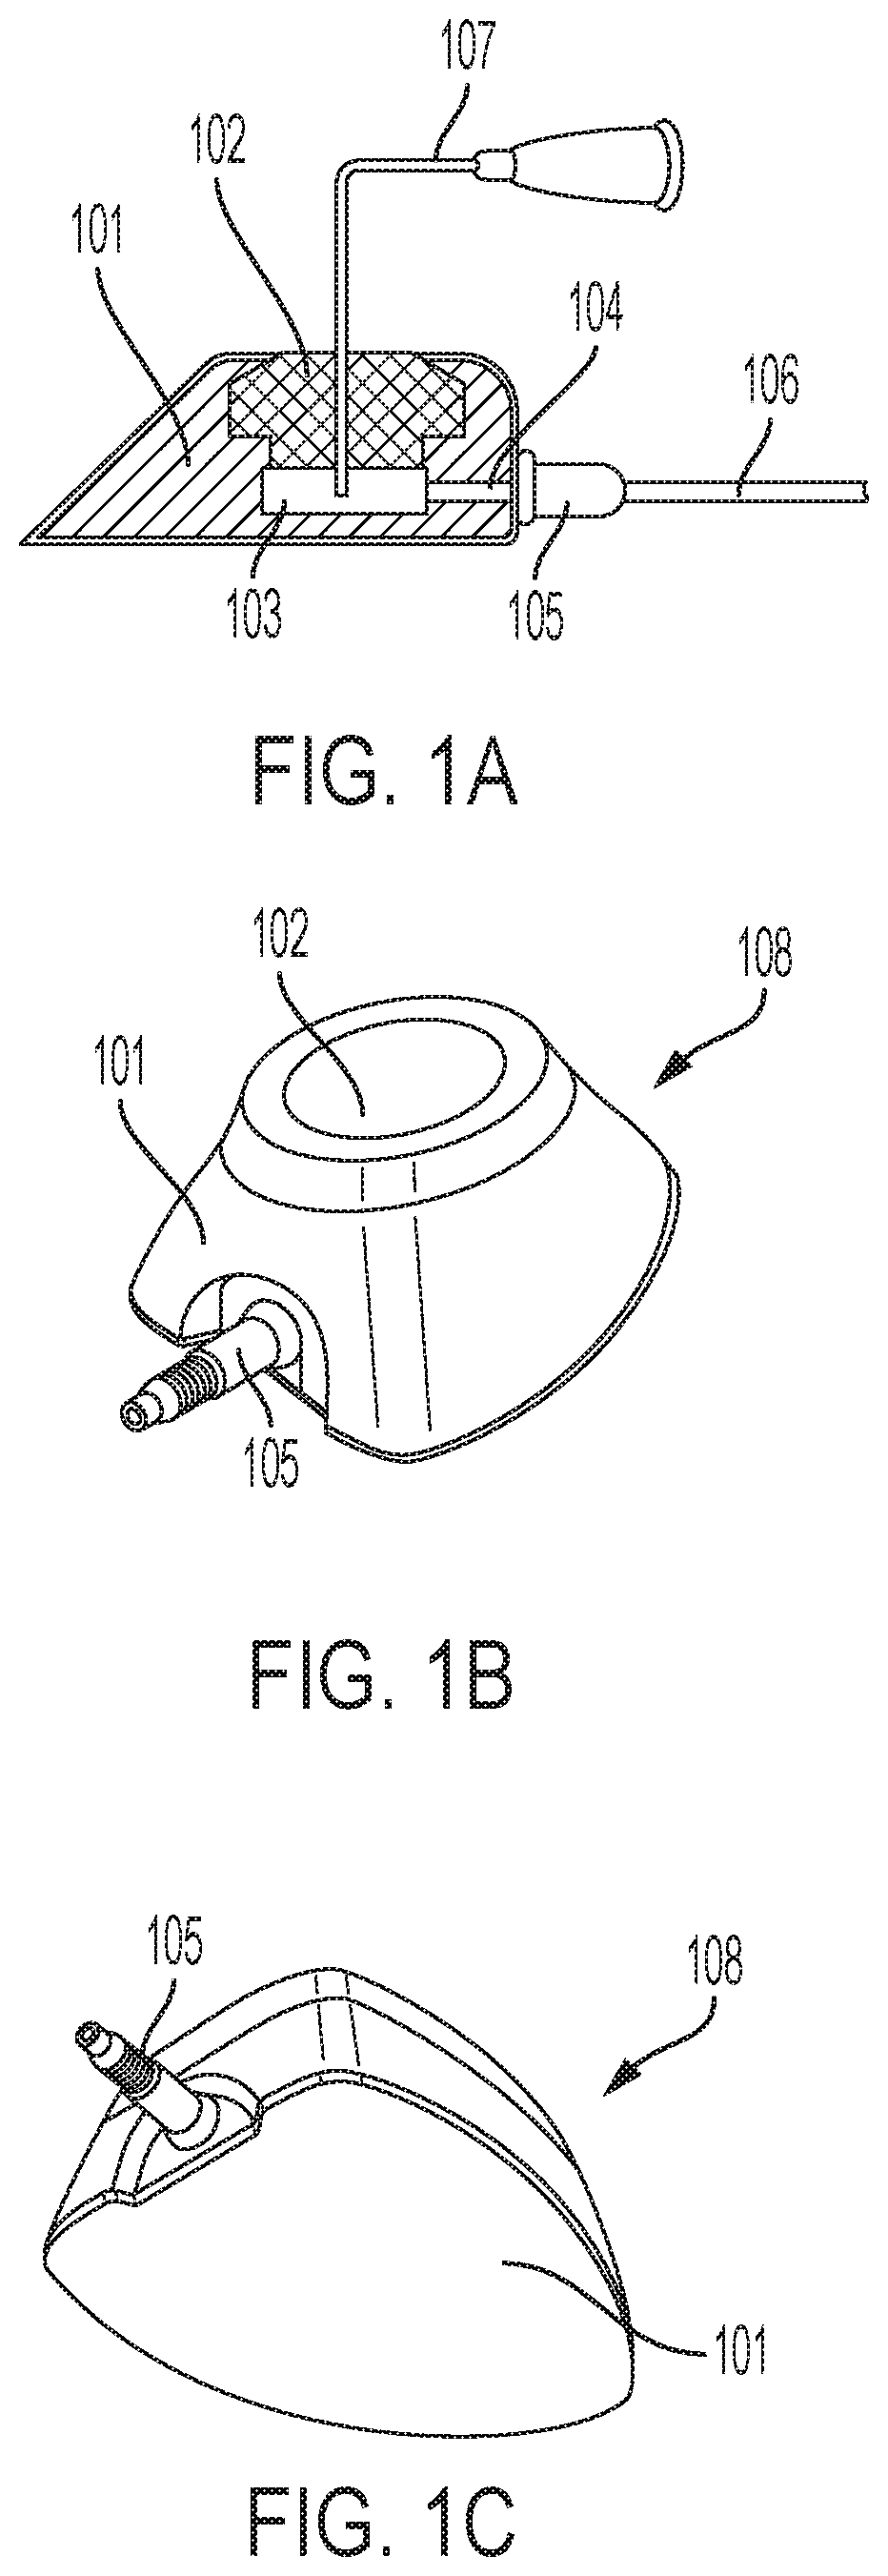 Access port system with self-adjusting catheter length